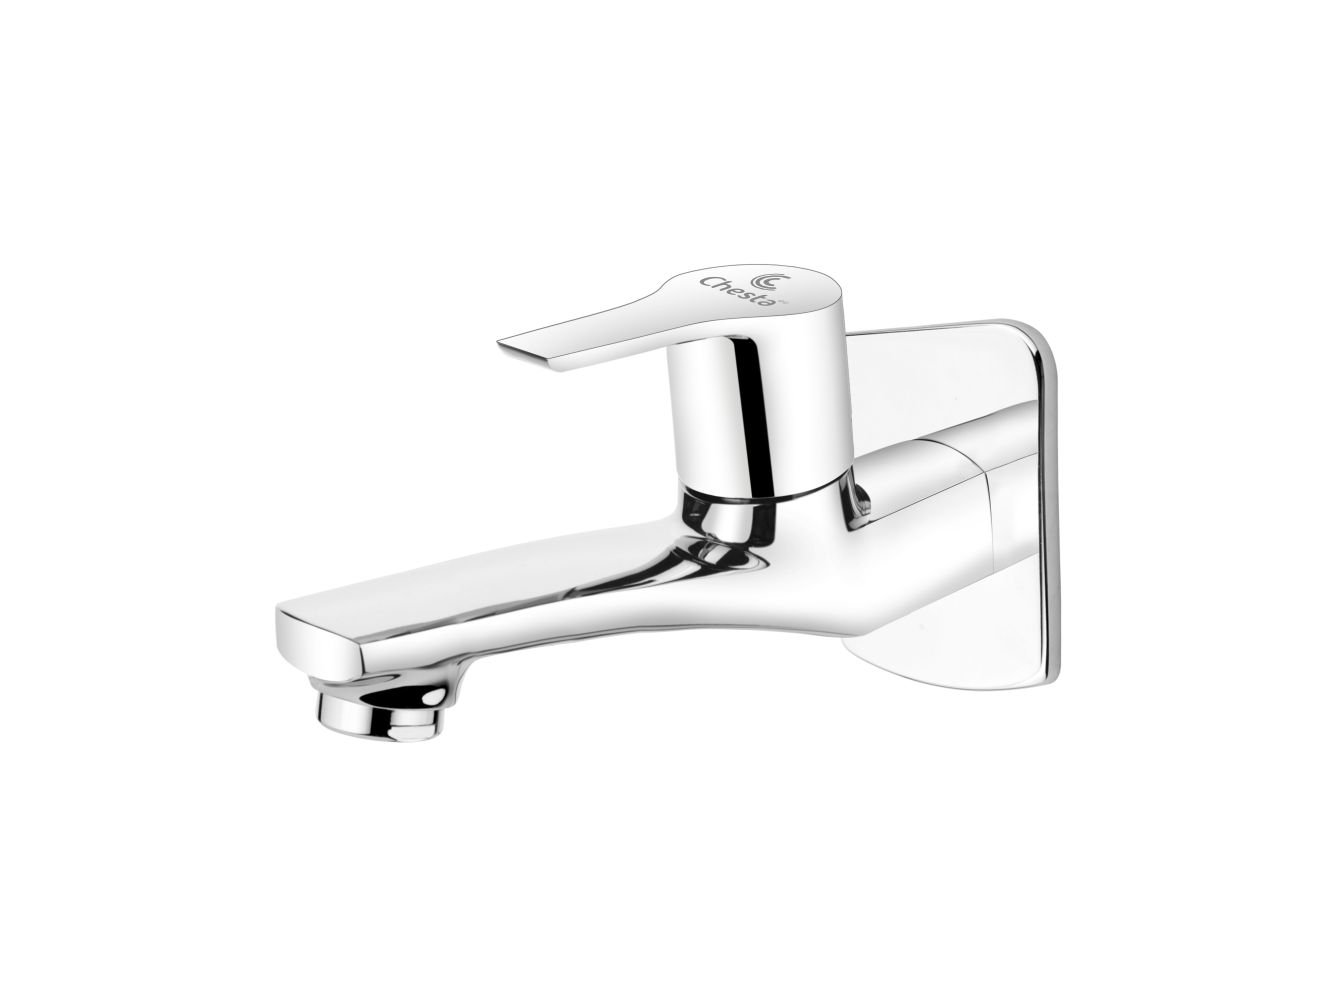 DY - 1002 - Long Body with Wall Flange by Chesta Bath